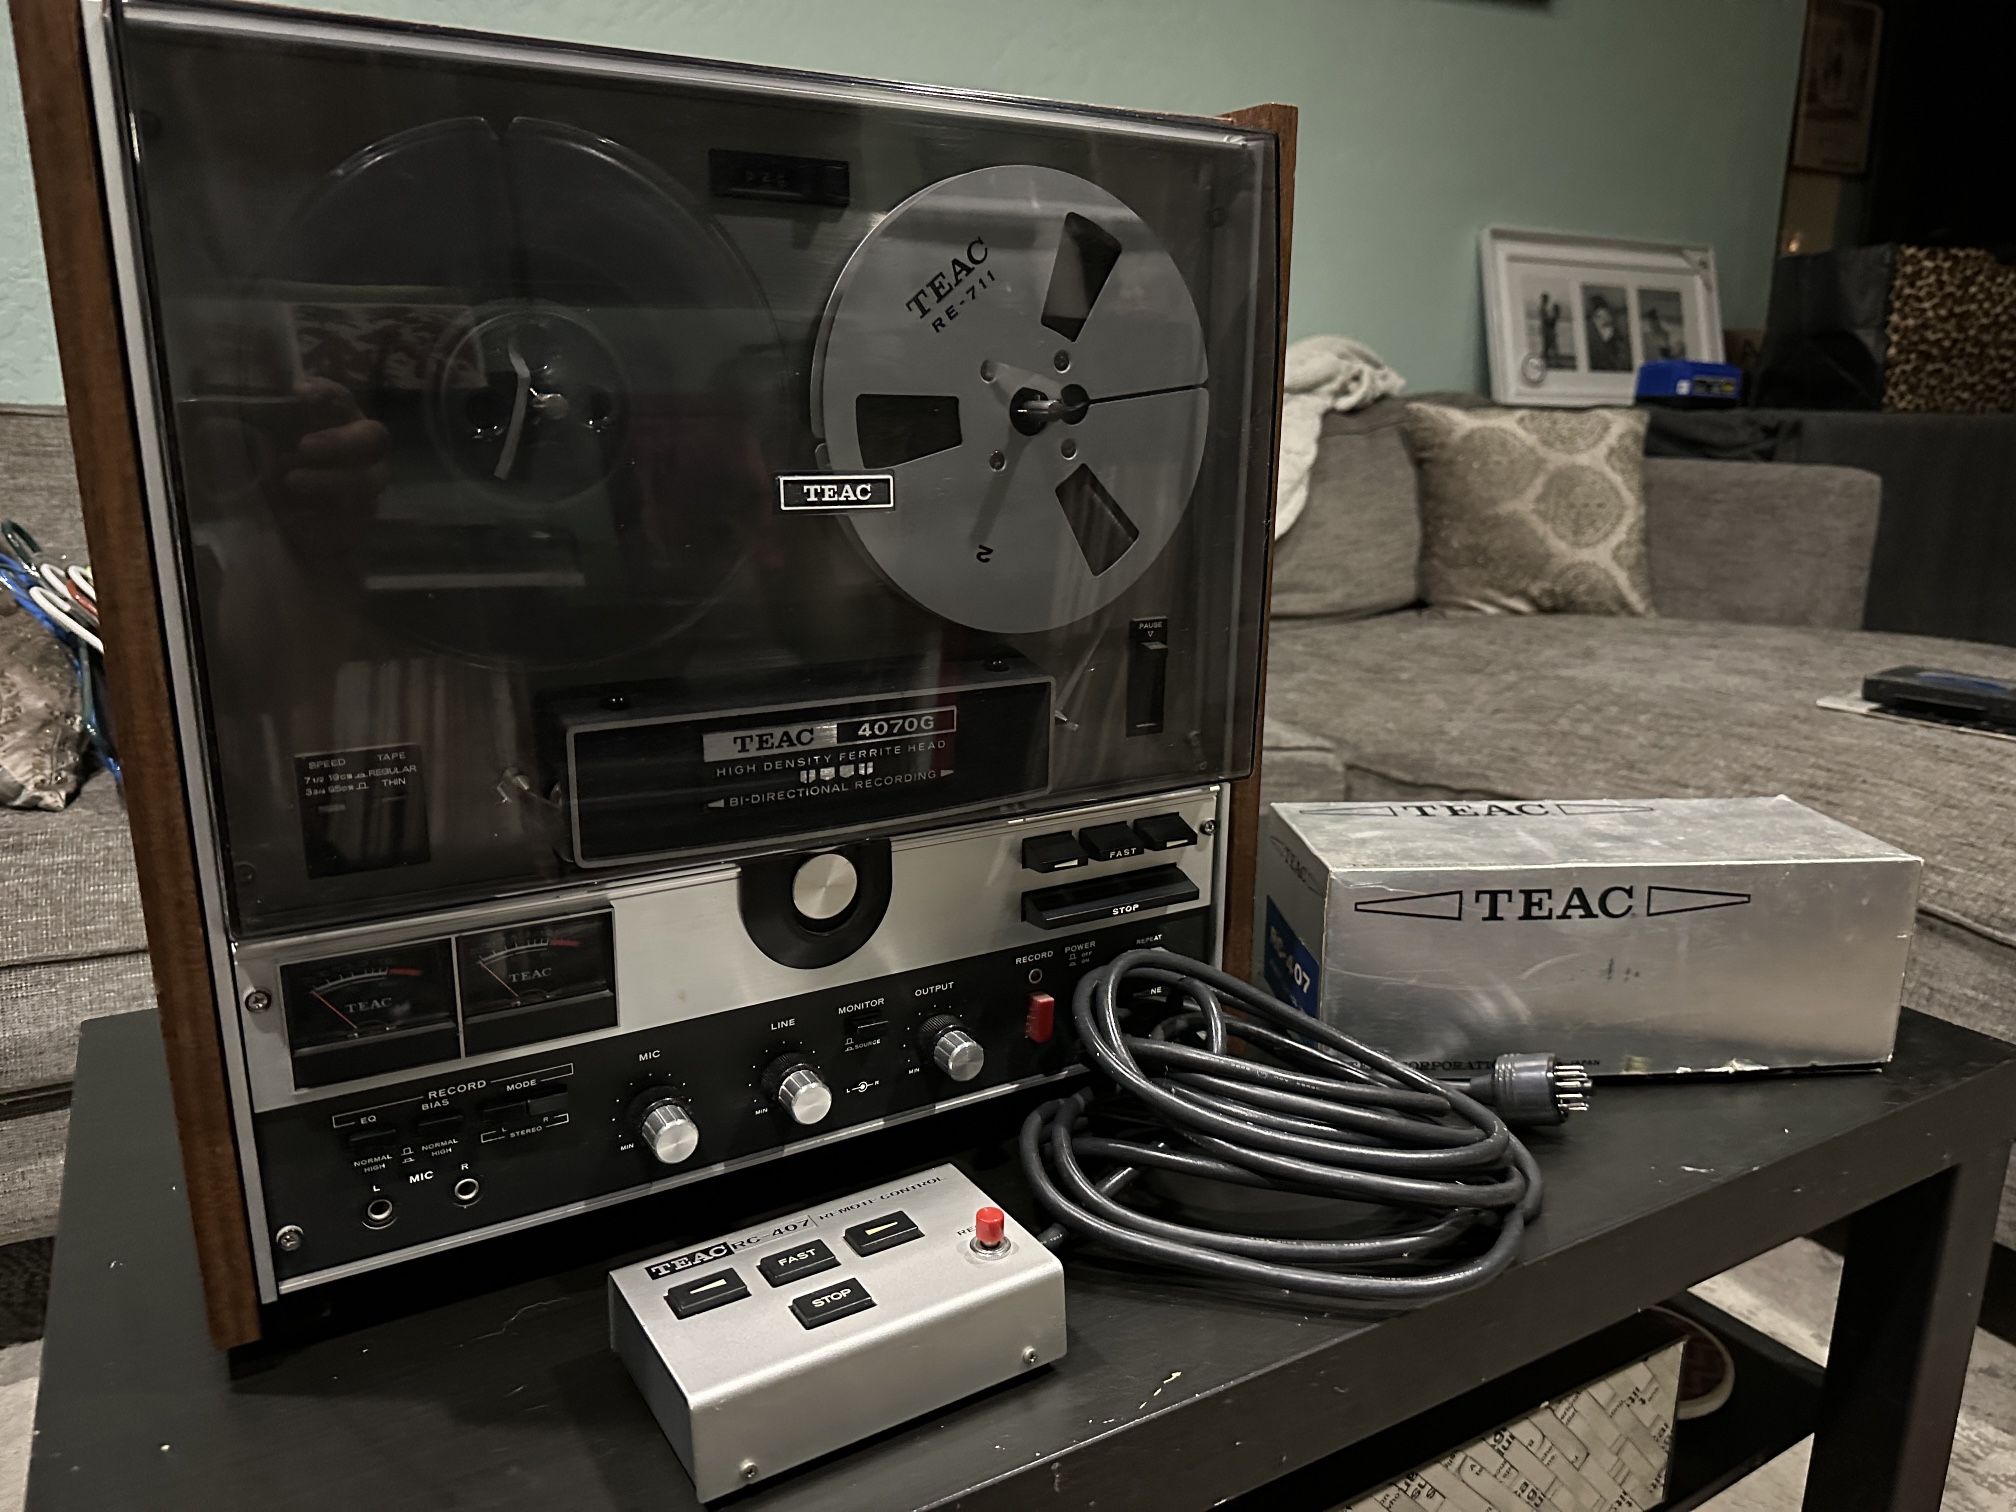 Teac Reel to Reel Stereo Tape Deck Model A-4070 Bi Directional Recording